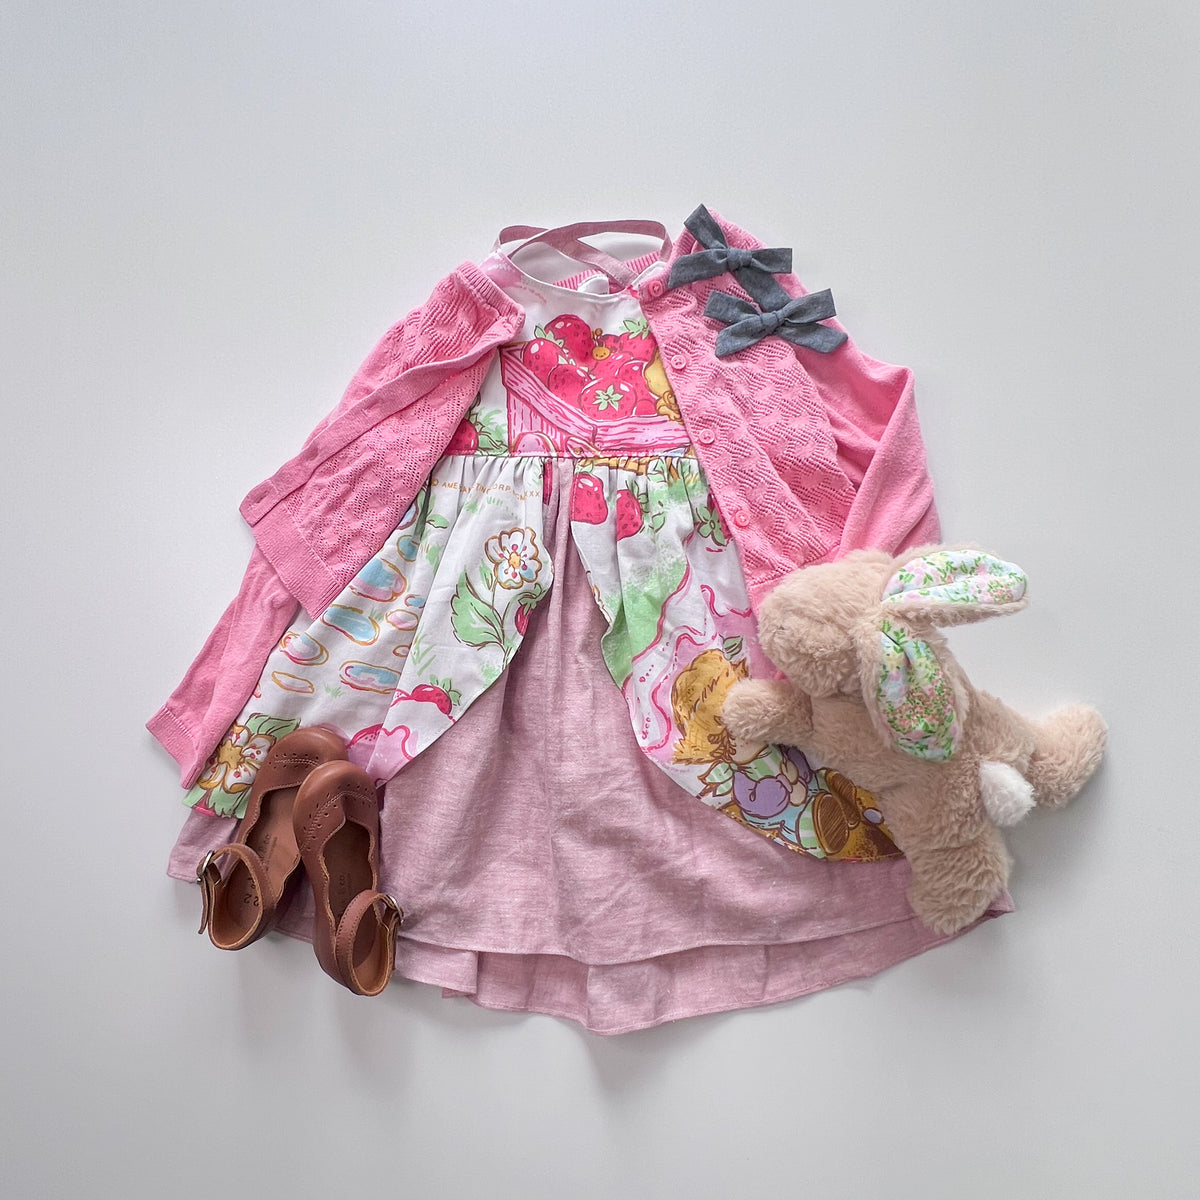 Heart Cardigan| Size 4T| |  Carters | Pink